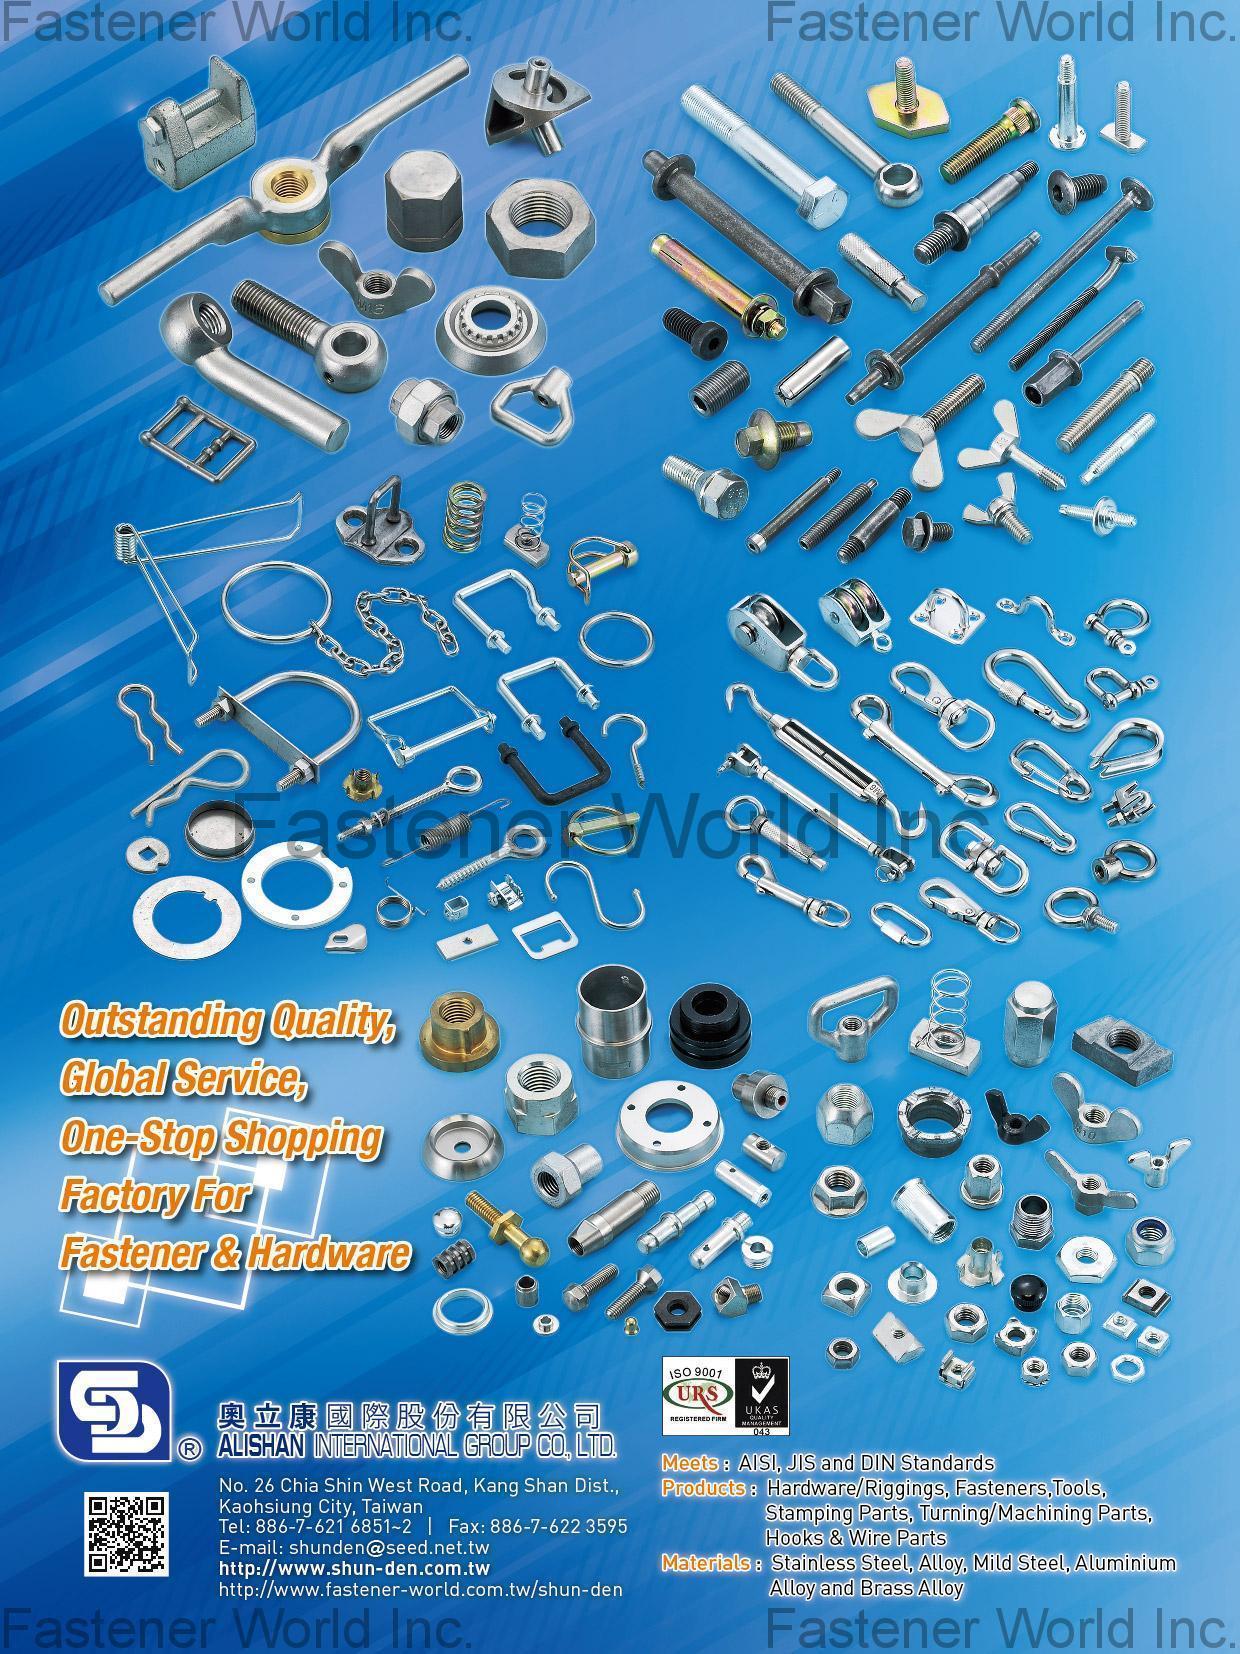 Turning Parts,All Kinds Of Nuts,All Kinds of Screws,Roller / Chains,Stamped Parts